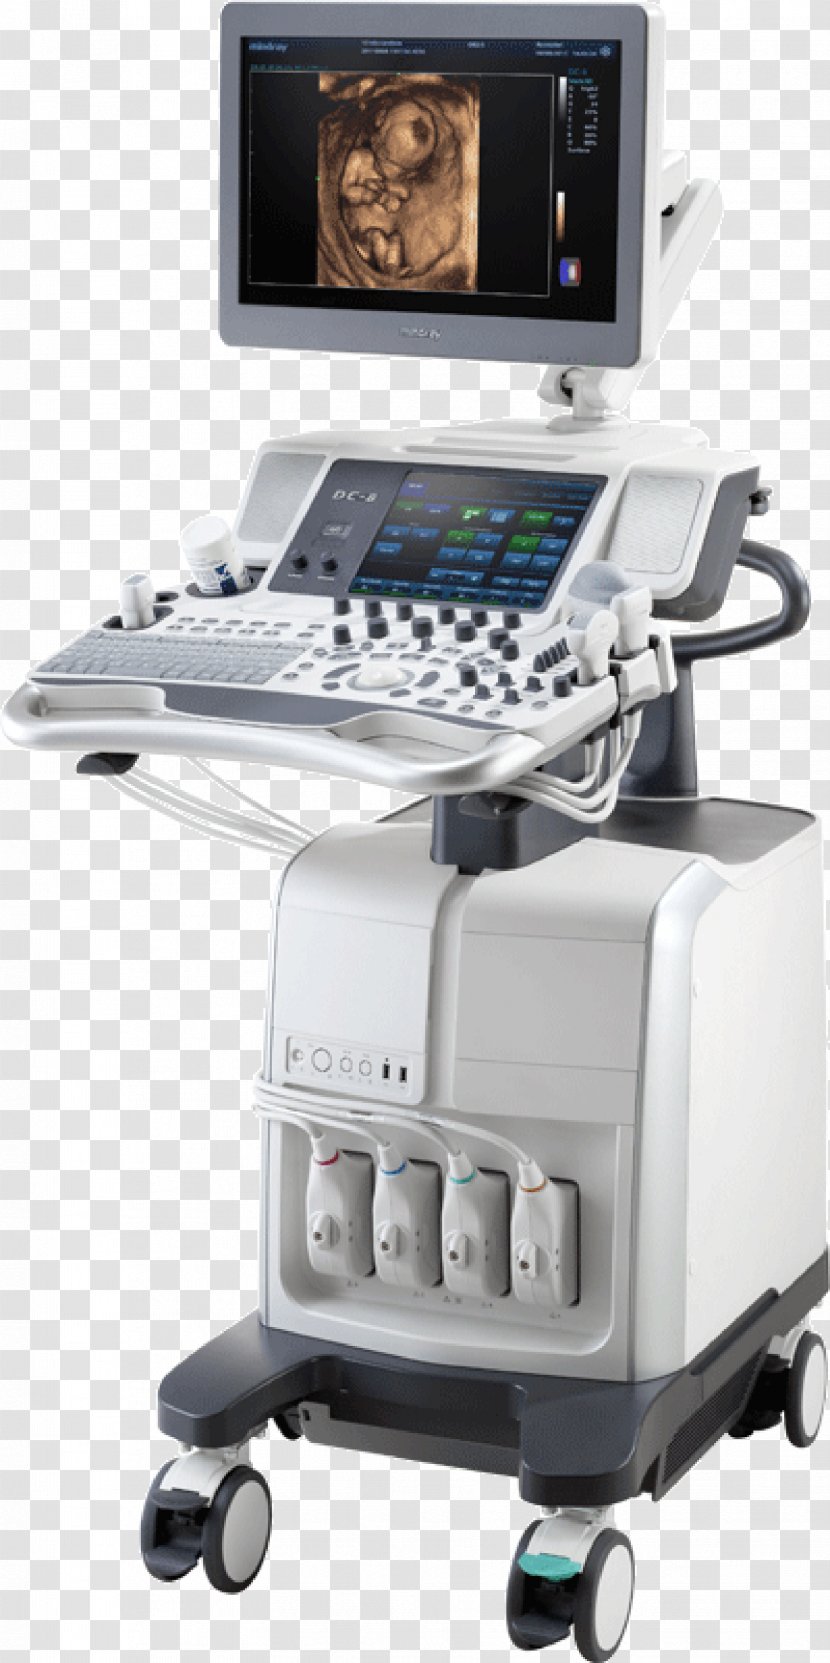 Douglas DC-8 Mindray Ultrasonography Medical Imaging Ultrasound - Technology - New Equipment Transparent PNG